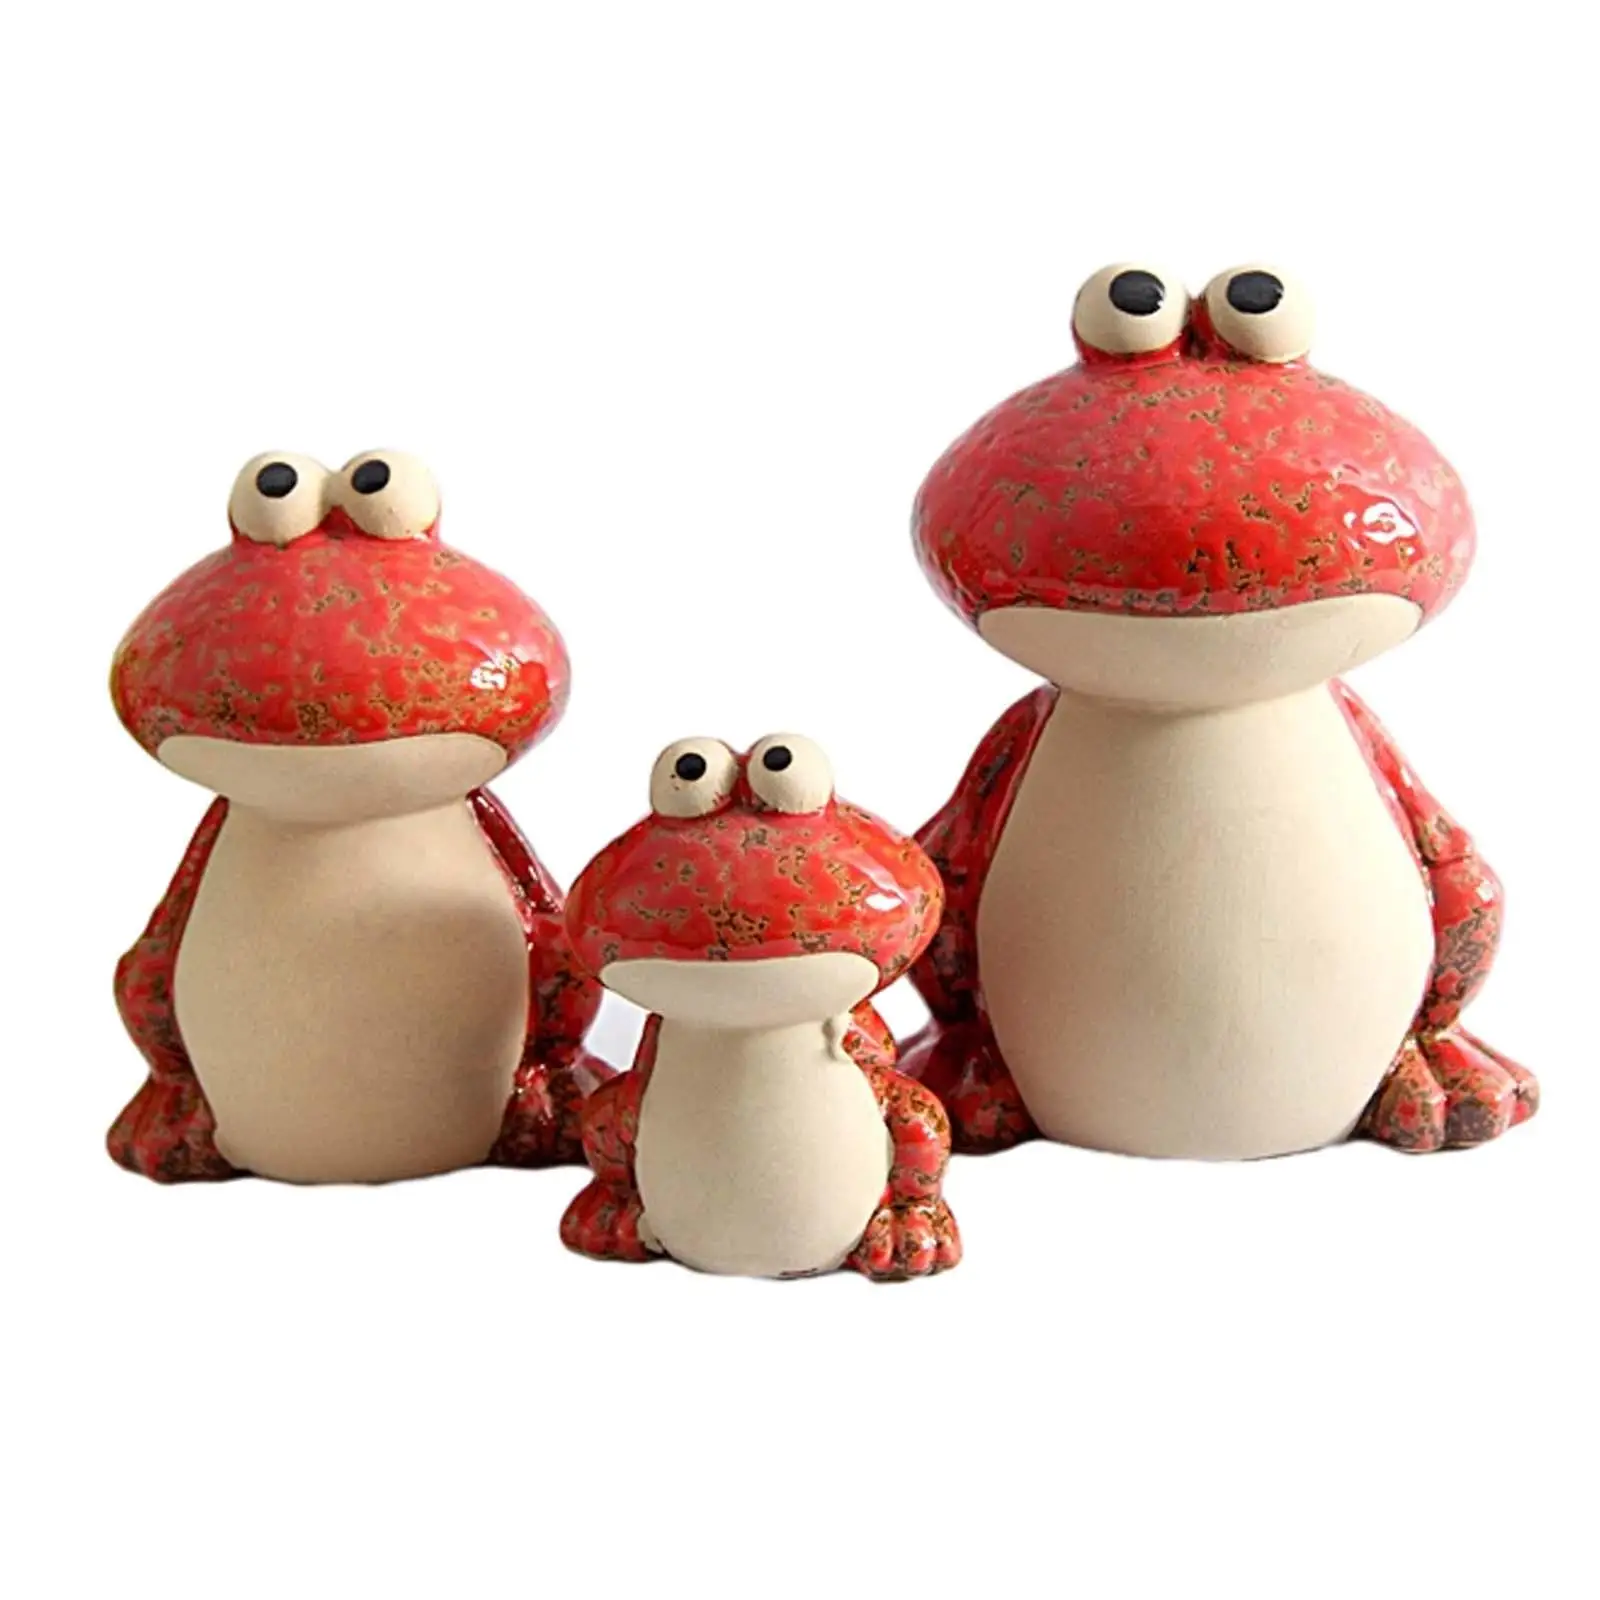 3x Ceramic Frog Statue Collection Frog Family Figurines Sculpture Ornament for Home Office Tearoom Cabinet Desktop Bedroom